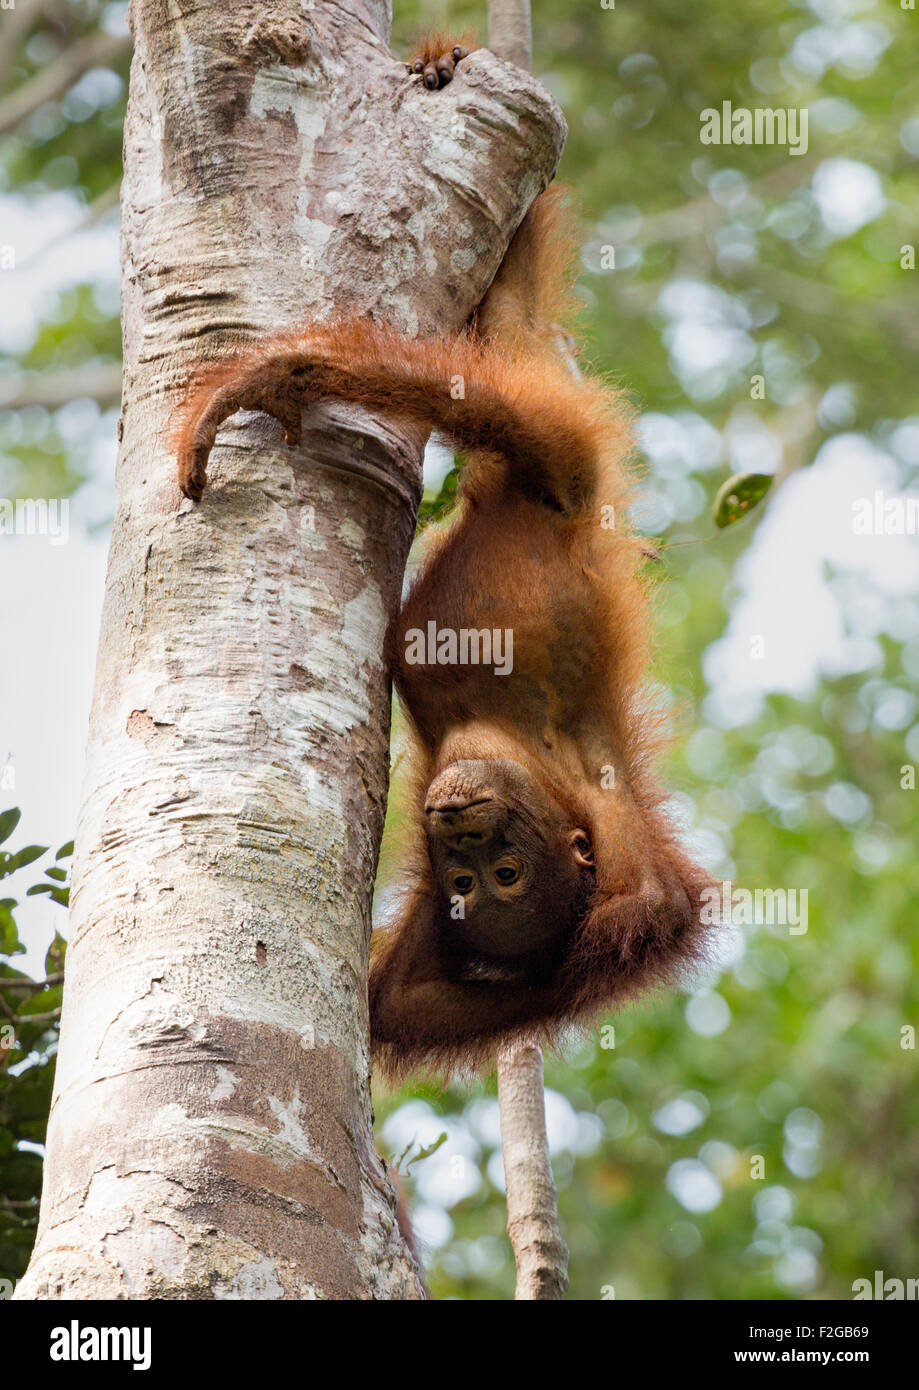 Orangutan child playing and hanging upside down from tree in Borneo Stock Photo